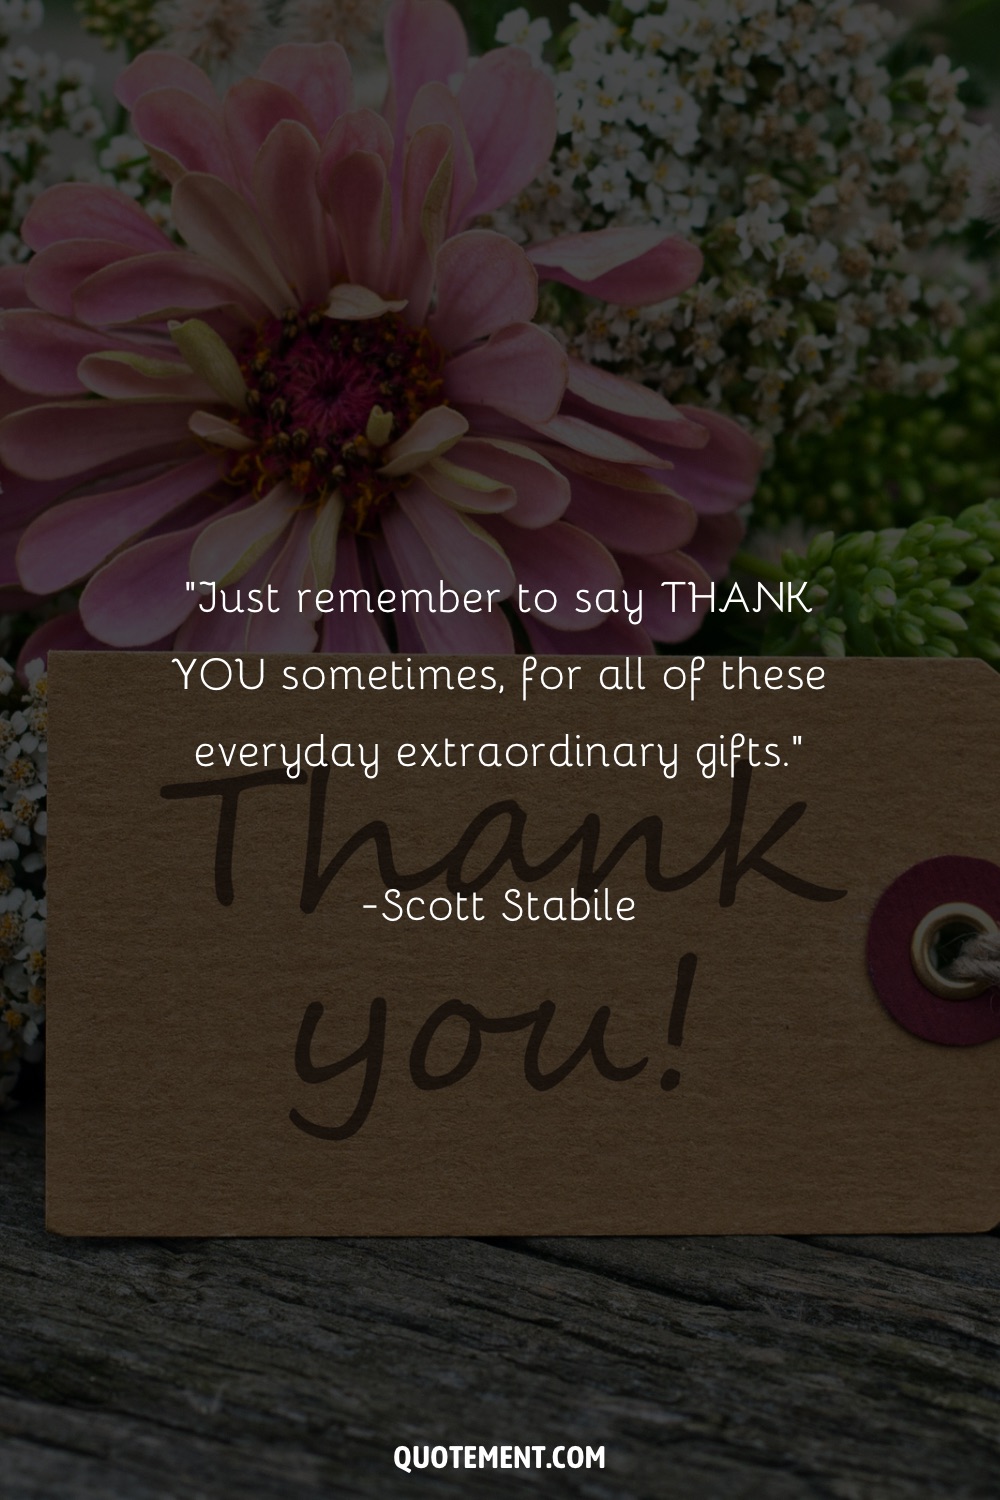 Just remember to say THANK YOU sometimes, for all of these everyday extraordinary gifts.